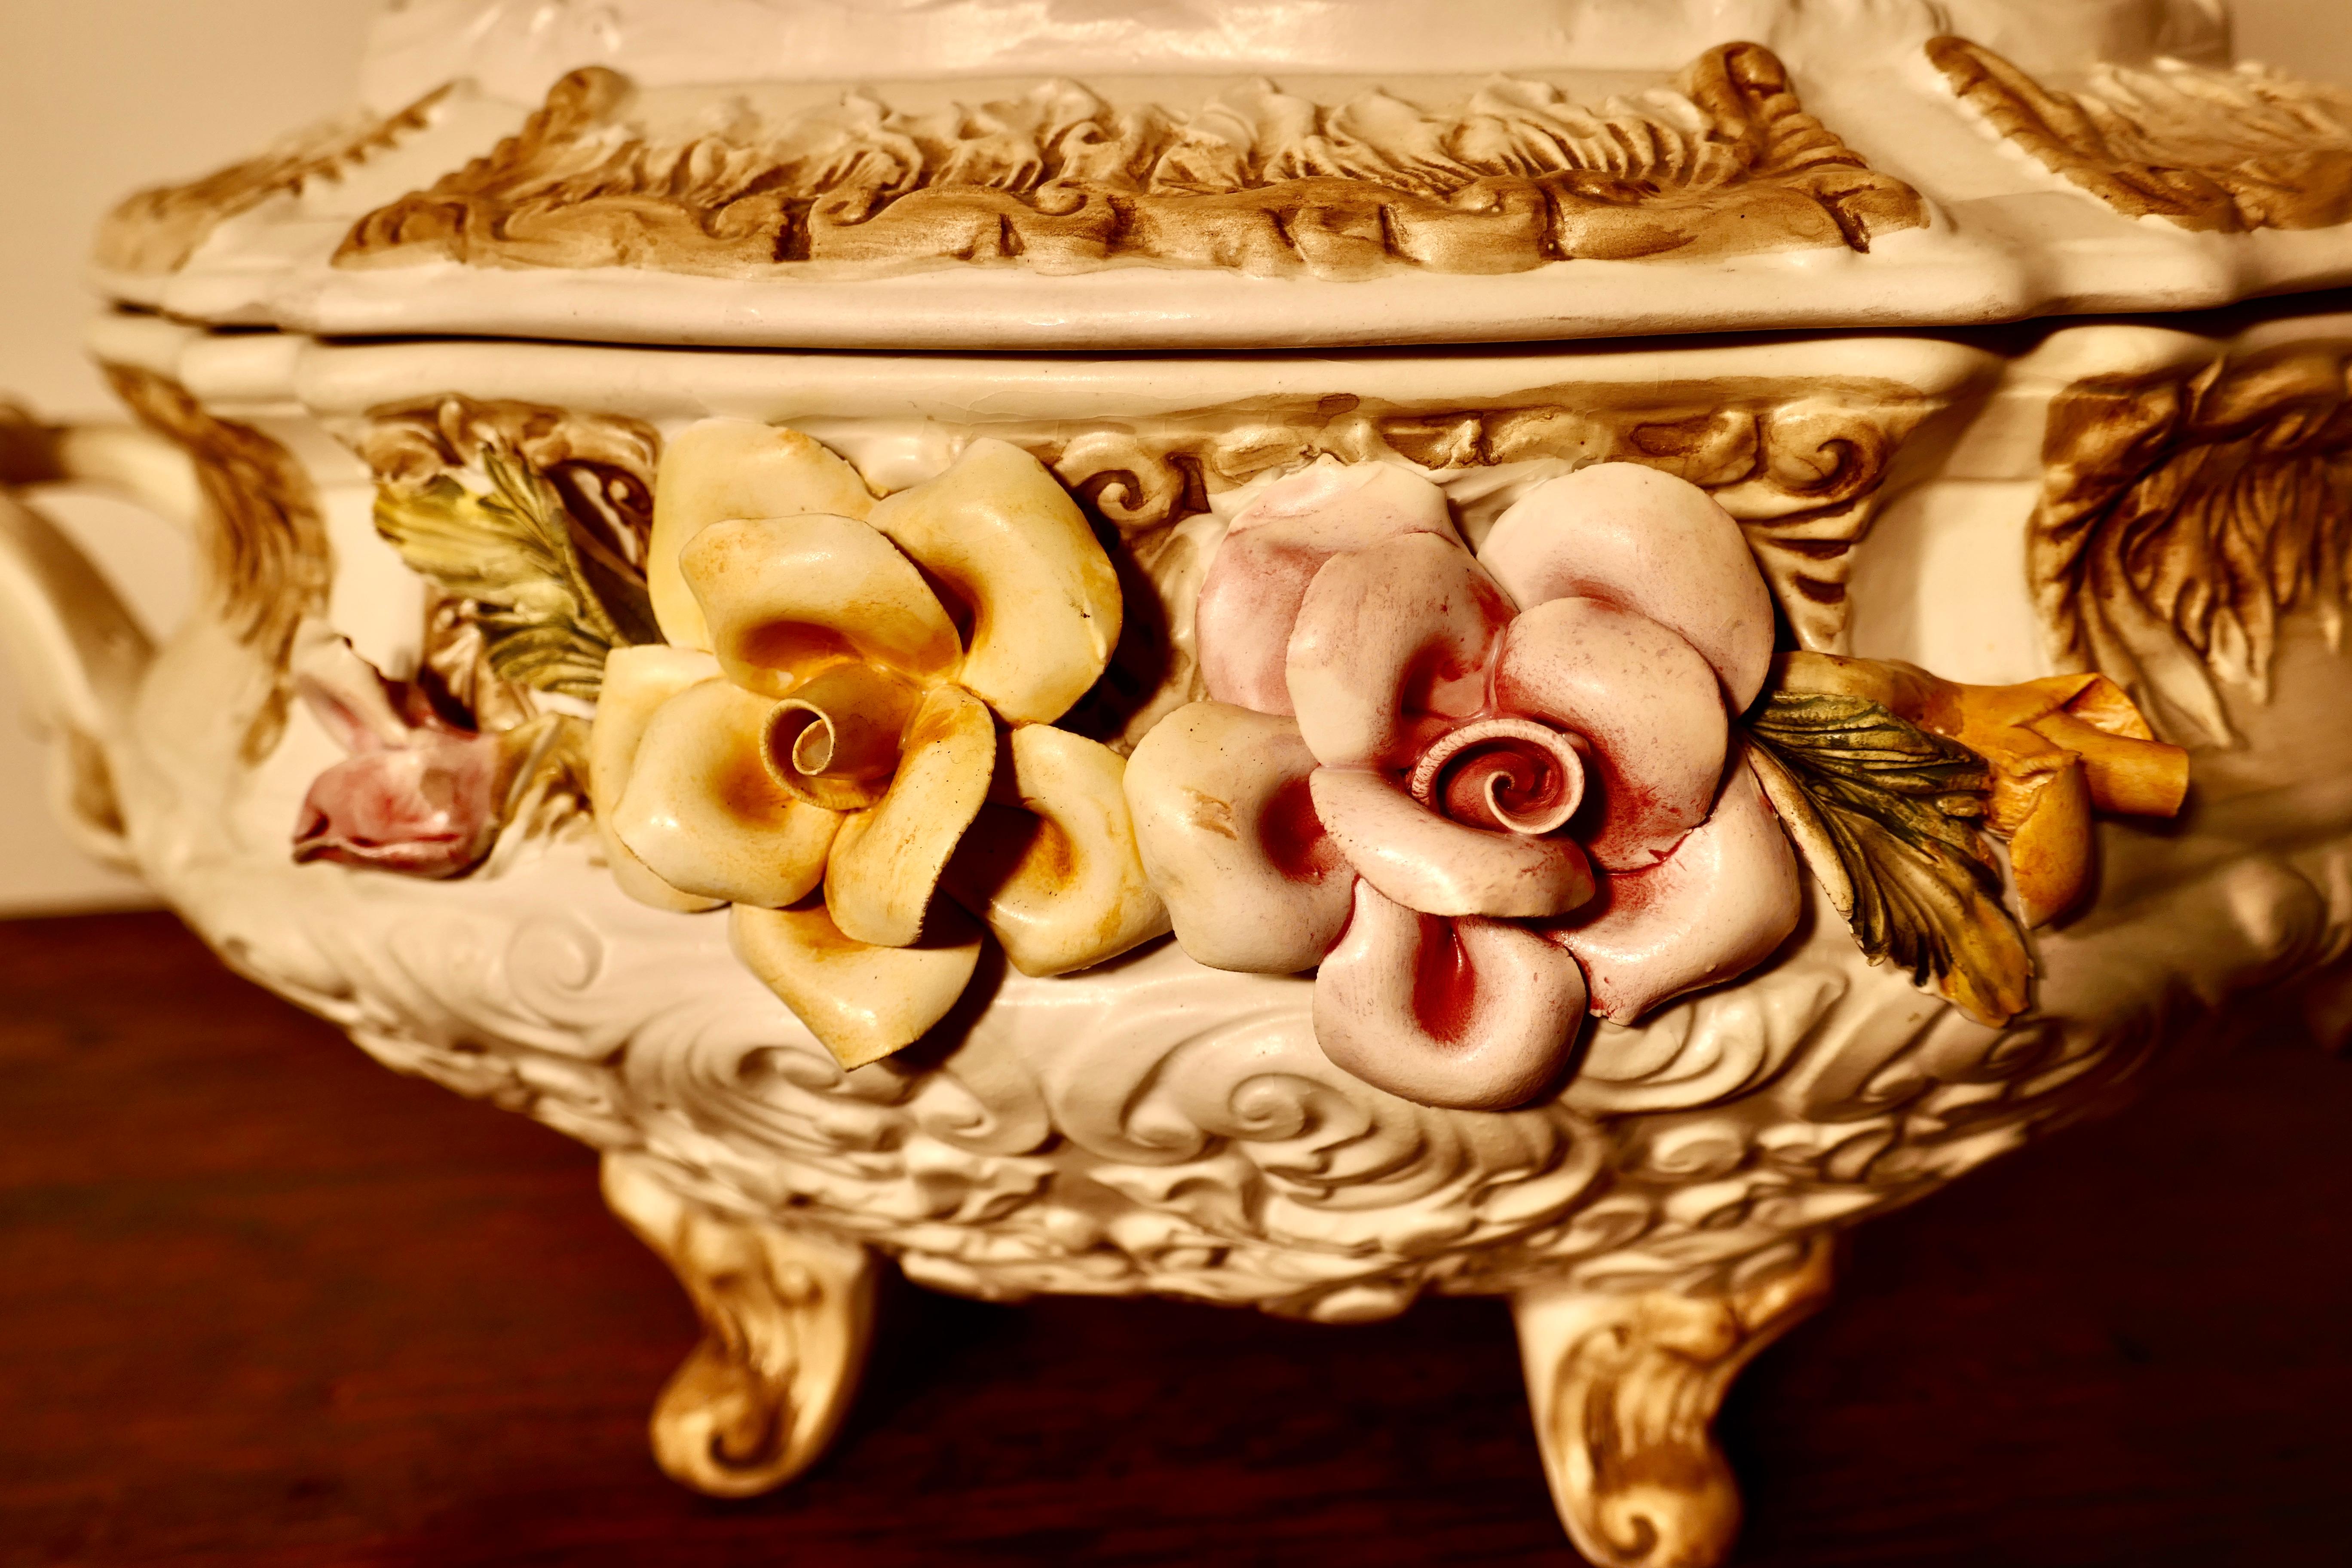 Charming late 20th century Capodimonte tureen with lid

A delightful piece all fully marked beneath, the lid has 2 children on the top and the bowl has handles and the trademark bocage and flowers on the front
Not new but as far as we can see no